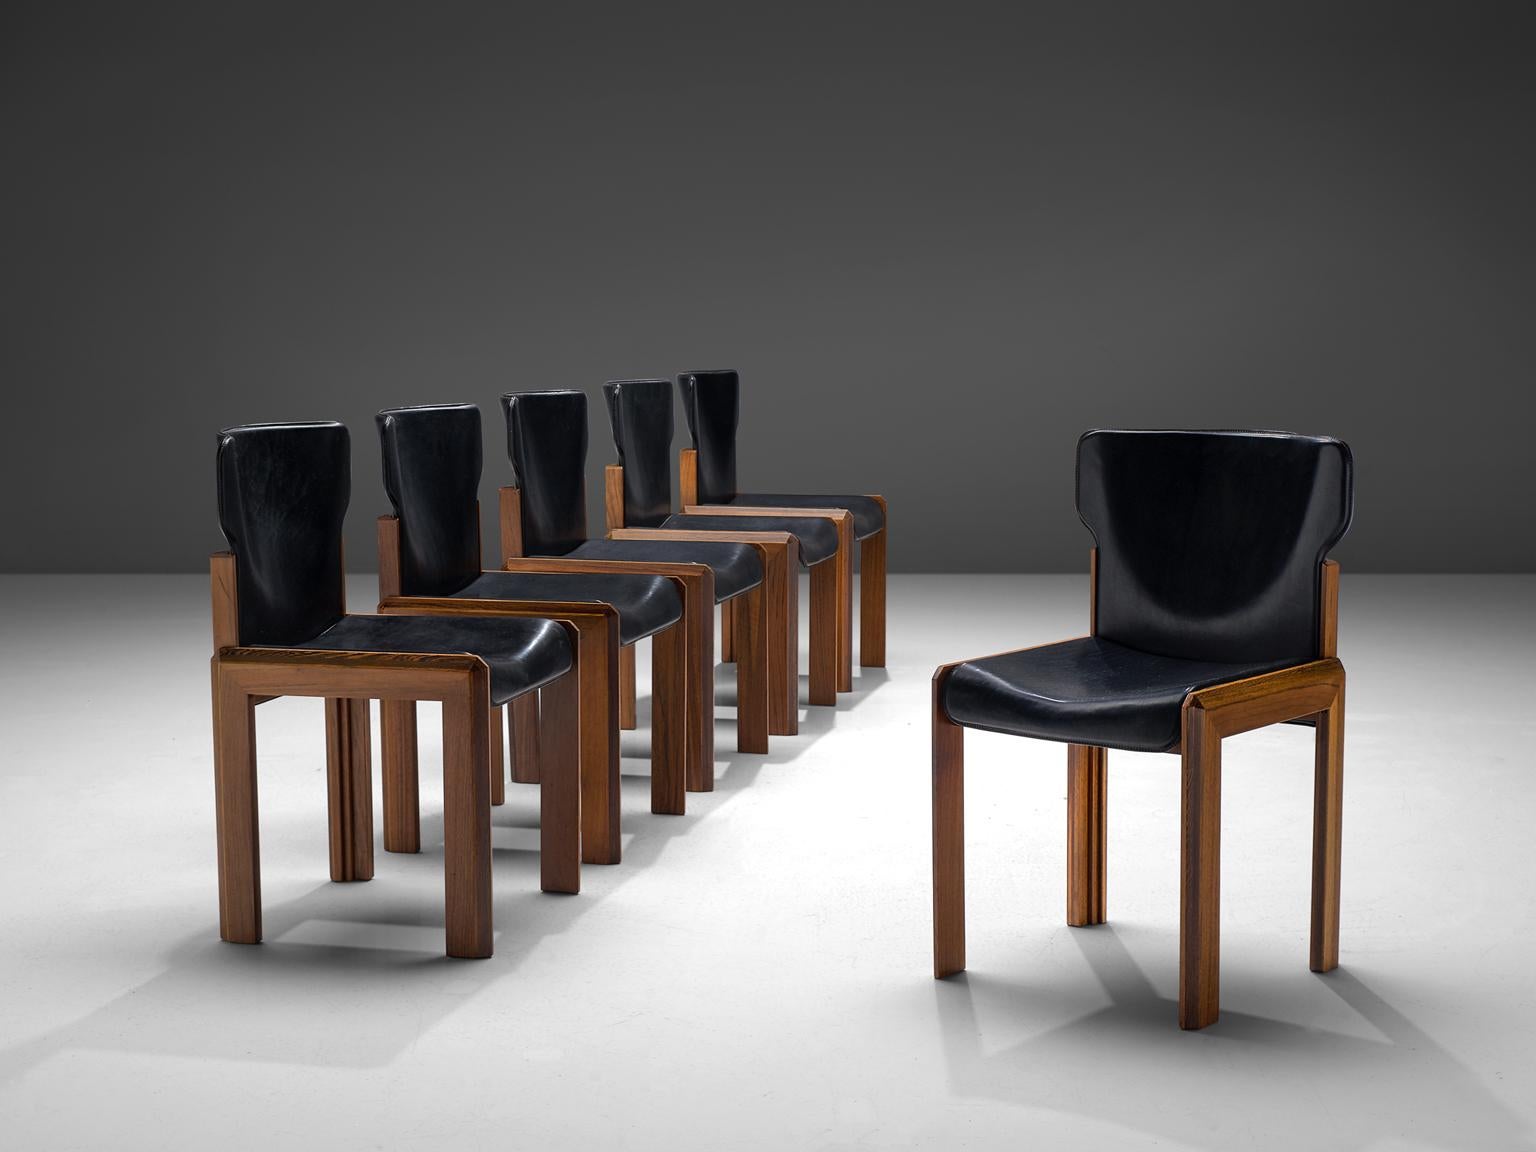 Luciano Frigerio, set of six leather 'Pagani' chairs in various woods, Italy, circa 1975

These chairs are built up of a frame with laminated, marqueterie of noble woods. The chairs have a dent seat and bac. These stylistic choices result in a